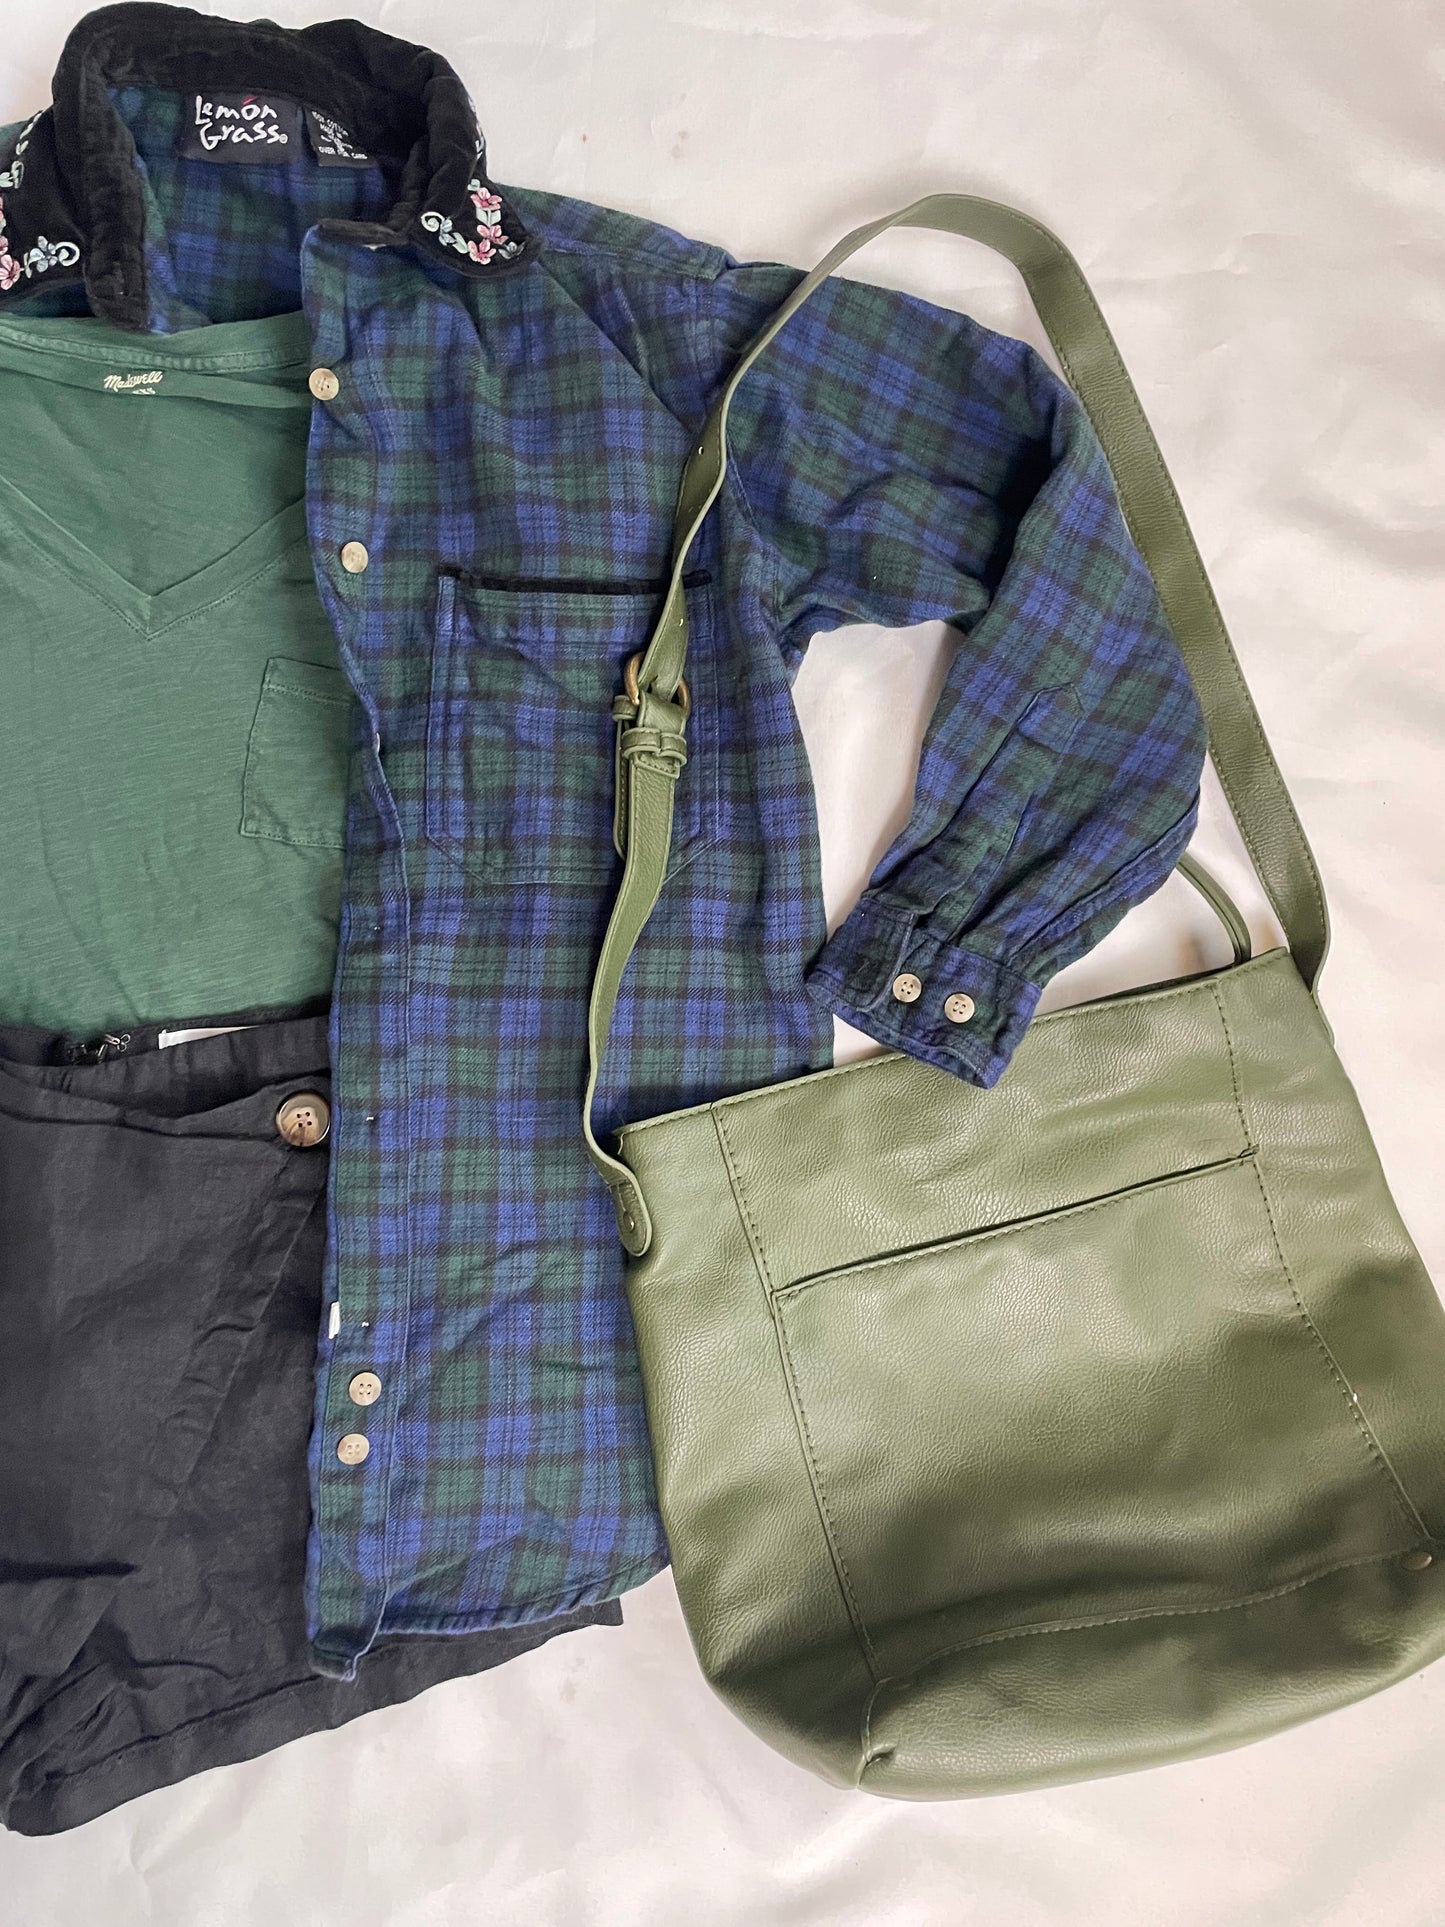 FALL inspired outfit bundle - t-shirt + skort + embroidered flannel + bag